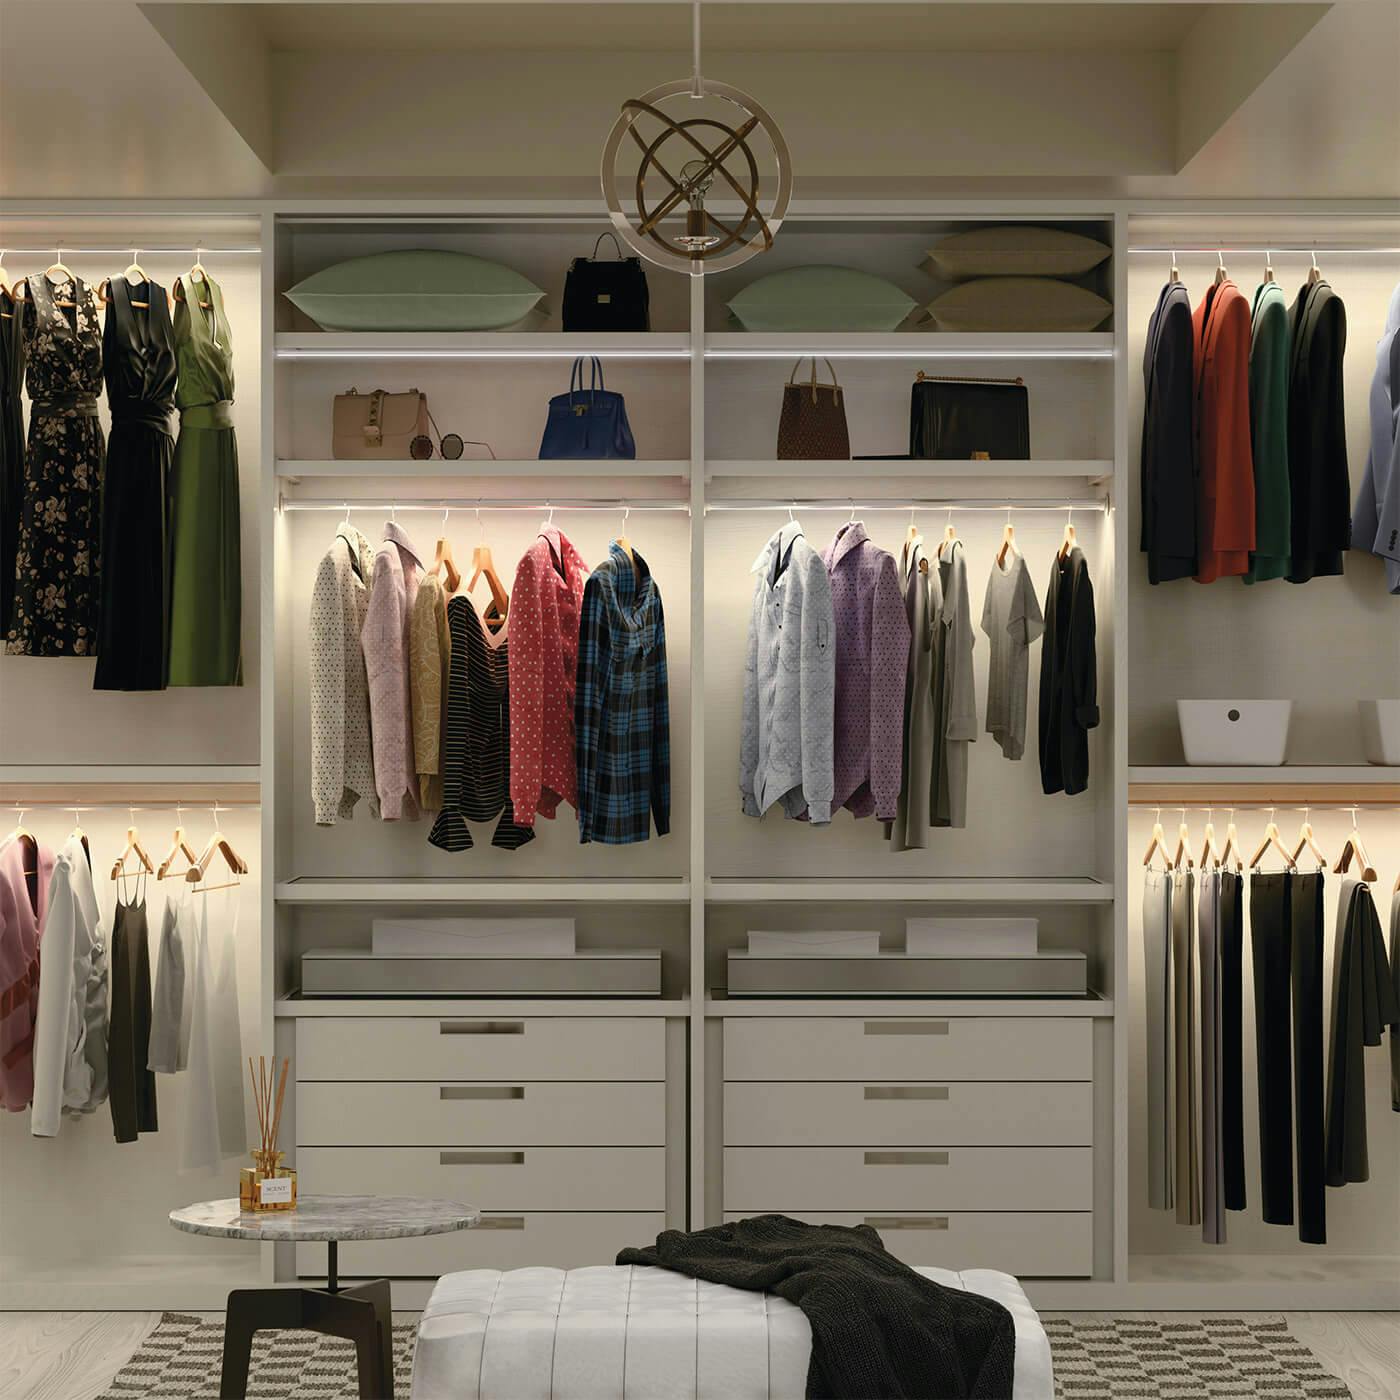 Closet with mini chandelier that is off while downlights are lit up